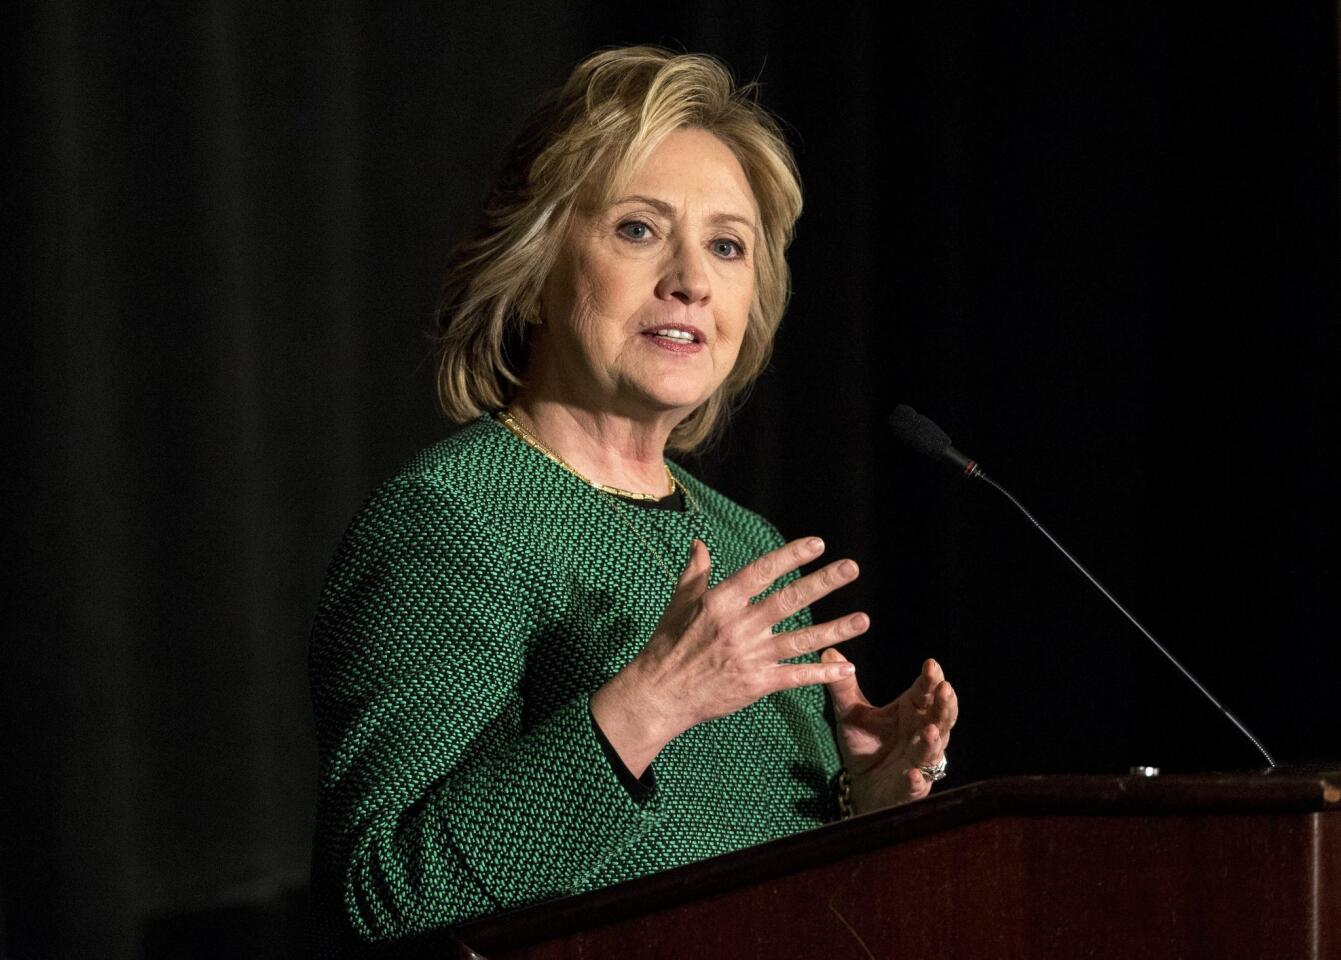 Hillary Clinton speaking after being inducted into the 2015 Irish America Hall of Fame in New York, New York, USA.